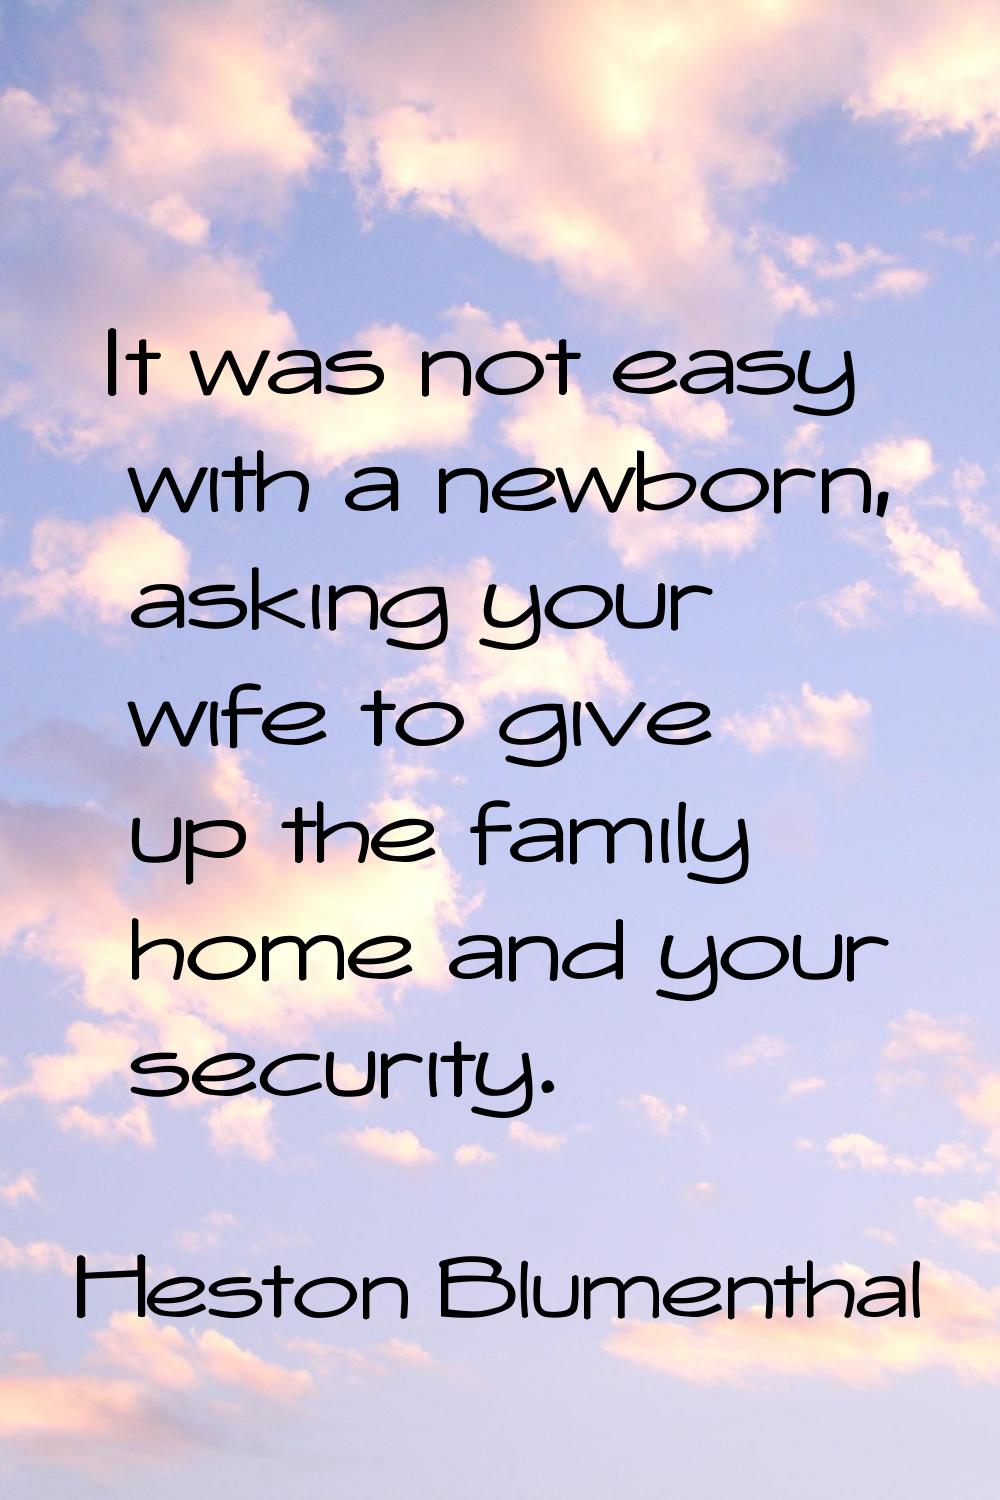 It was not easy with a newborn, asking your wife to give up the family home and your security.